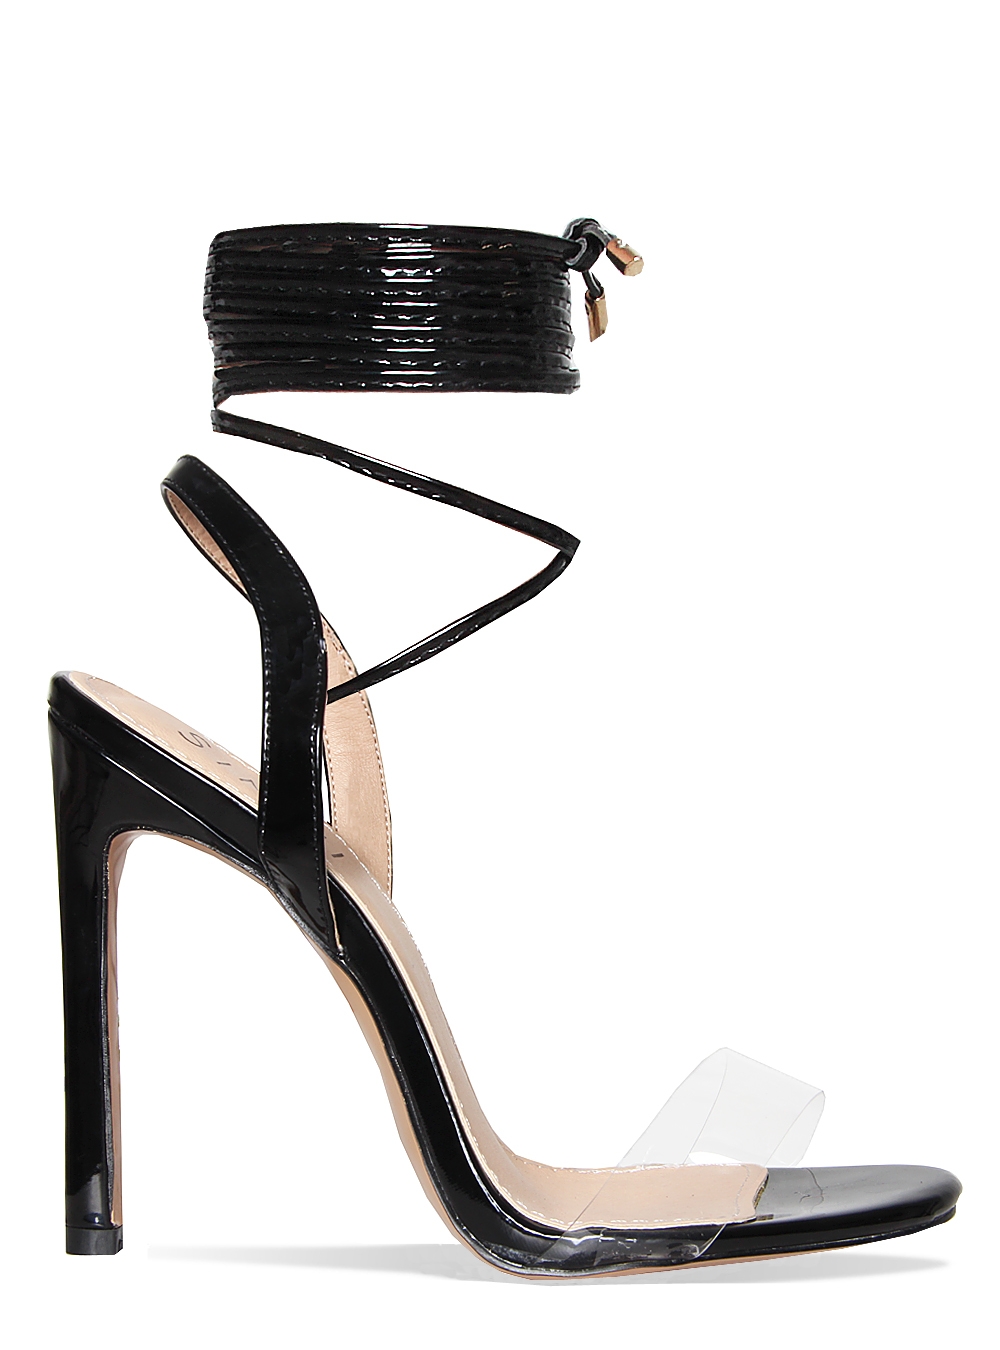 Niuna - Lace Up Transparent High Heel Sandals | YesStyle